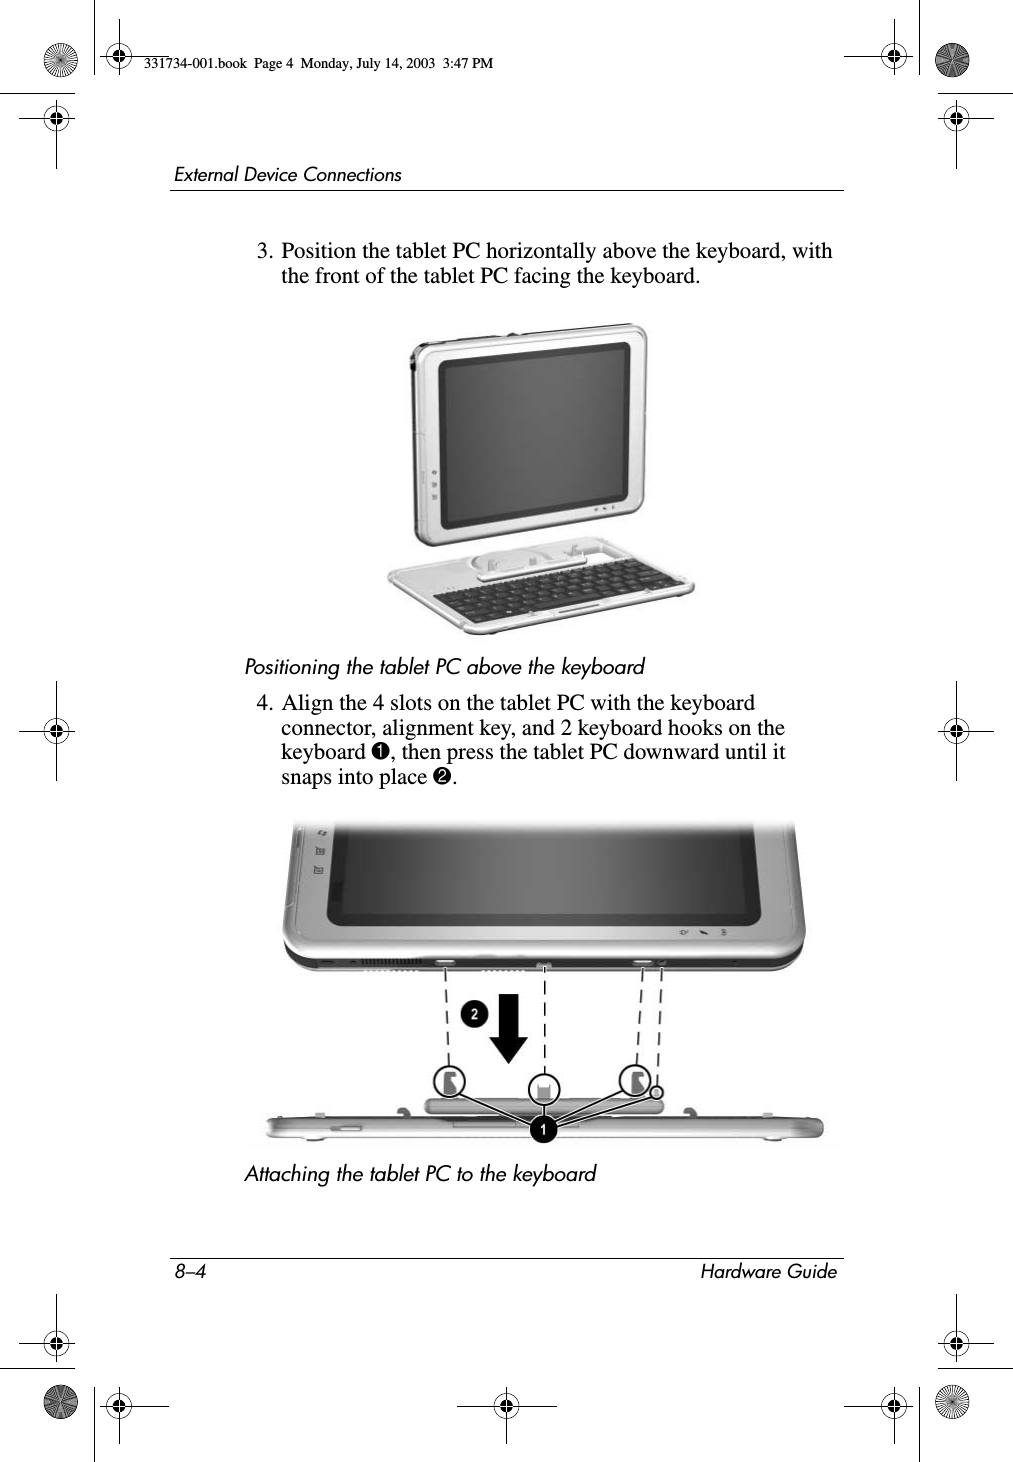 8–4 Hardware GuideExternal Device Connections3. Position the tablet PC horizontally above the keyboard, with the front of the tablet PC facing the keyboard.Positioning the tablet PC above the keyboard4. Align the 4 slots on the tablet PC with the keyboard connector, alignment key, and 2 keyboard hooks on the keyboard 1, then press the tablet PC downward until it snaps into place 2.Attaching the tablet PC to the keyboard 331734-001.book  Page 4  Monday, July 14, 2003  3:47 PM